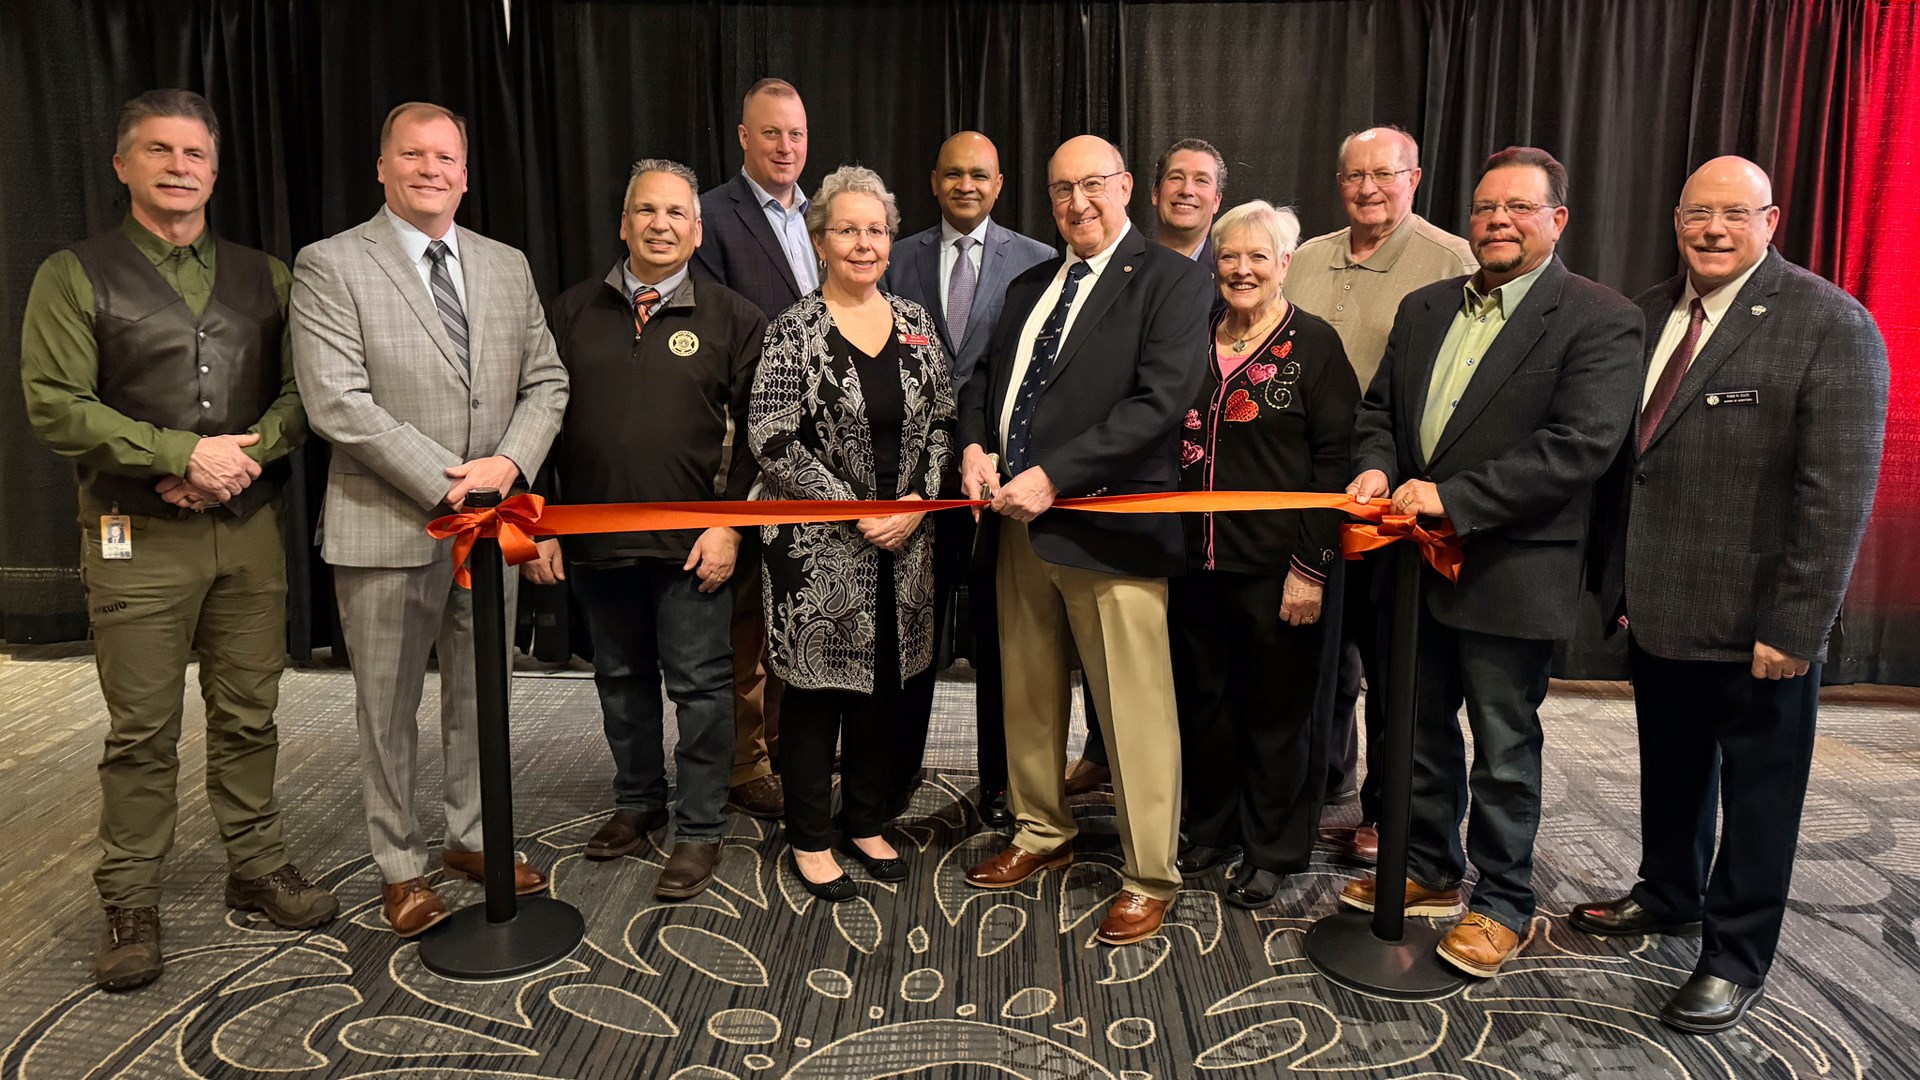 NRA Board Great American Outdoor Show Ribbon Cutting Ceremony